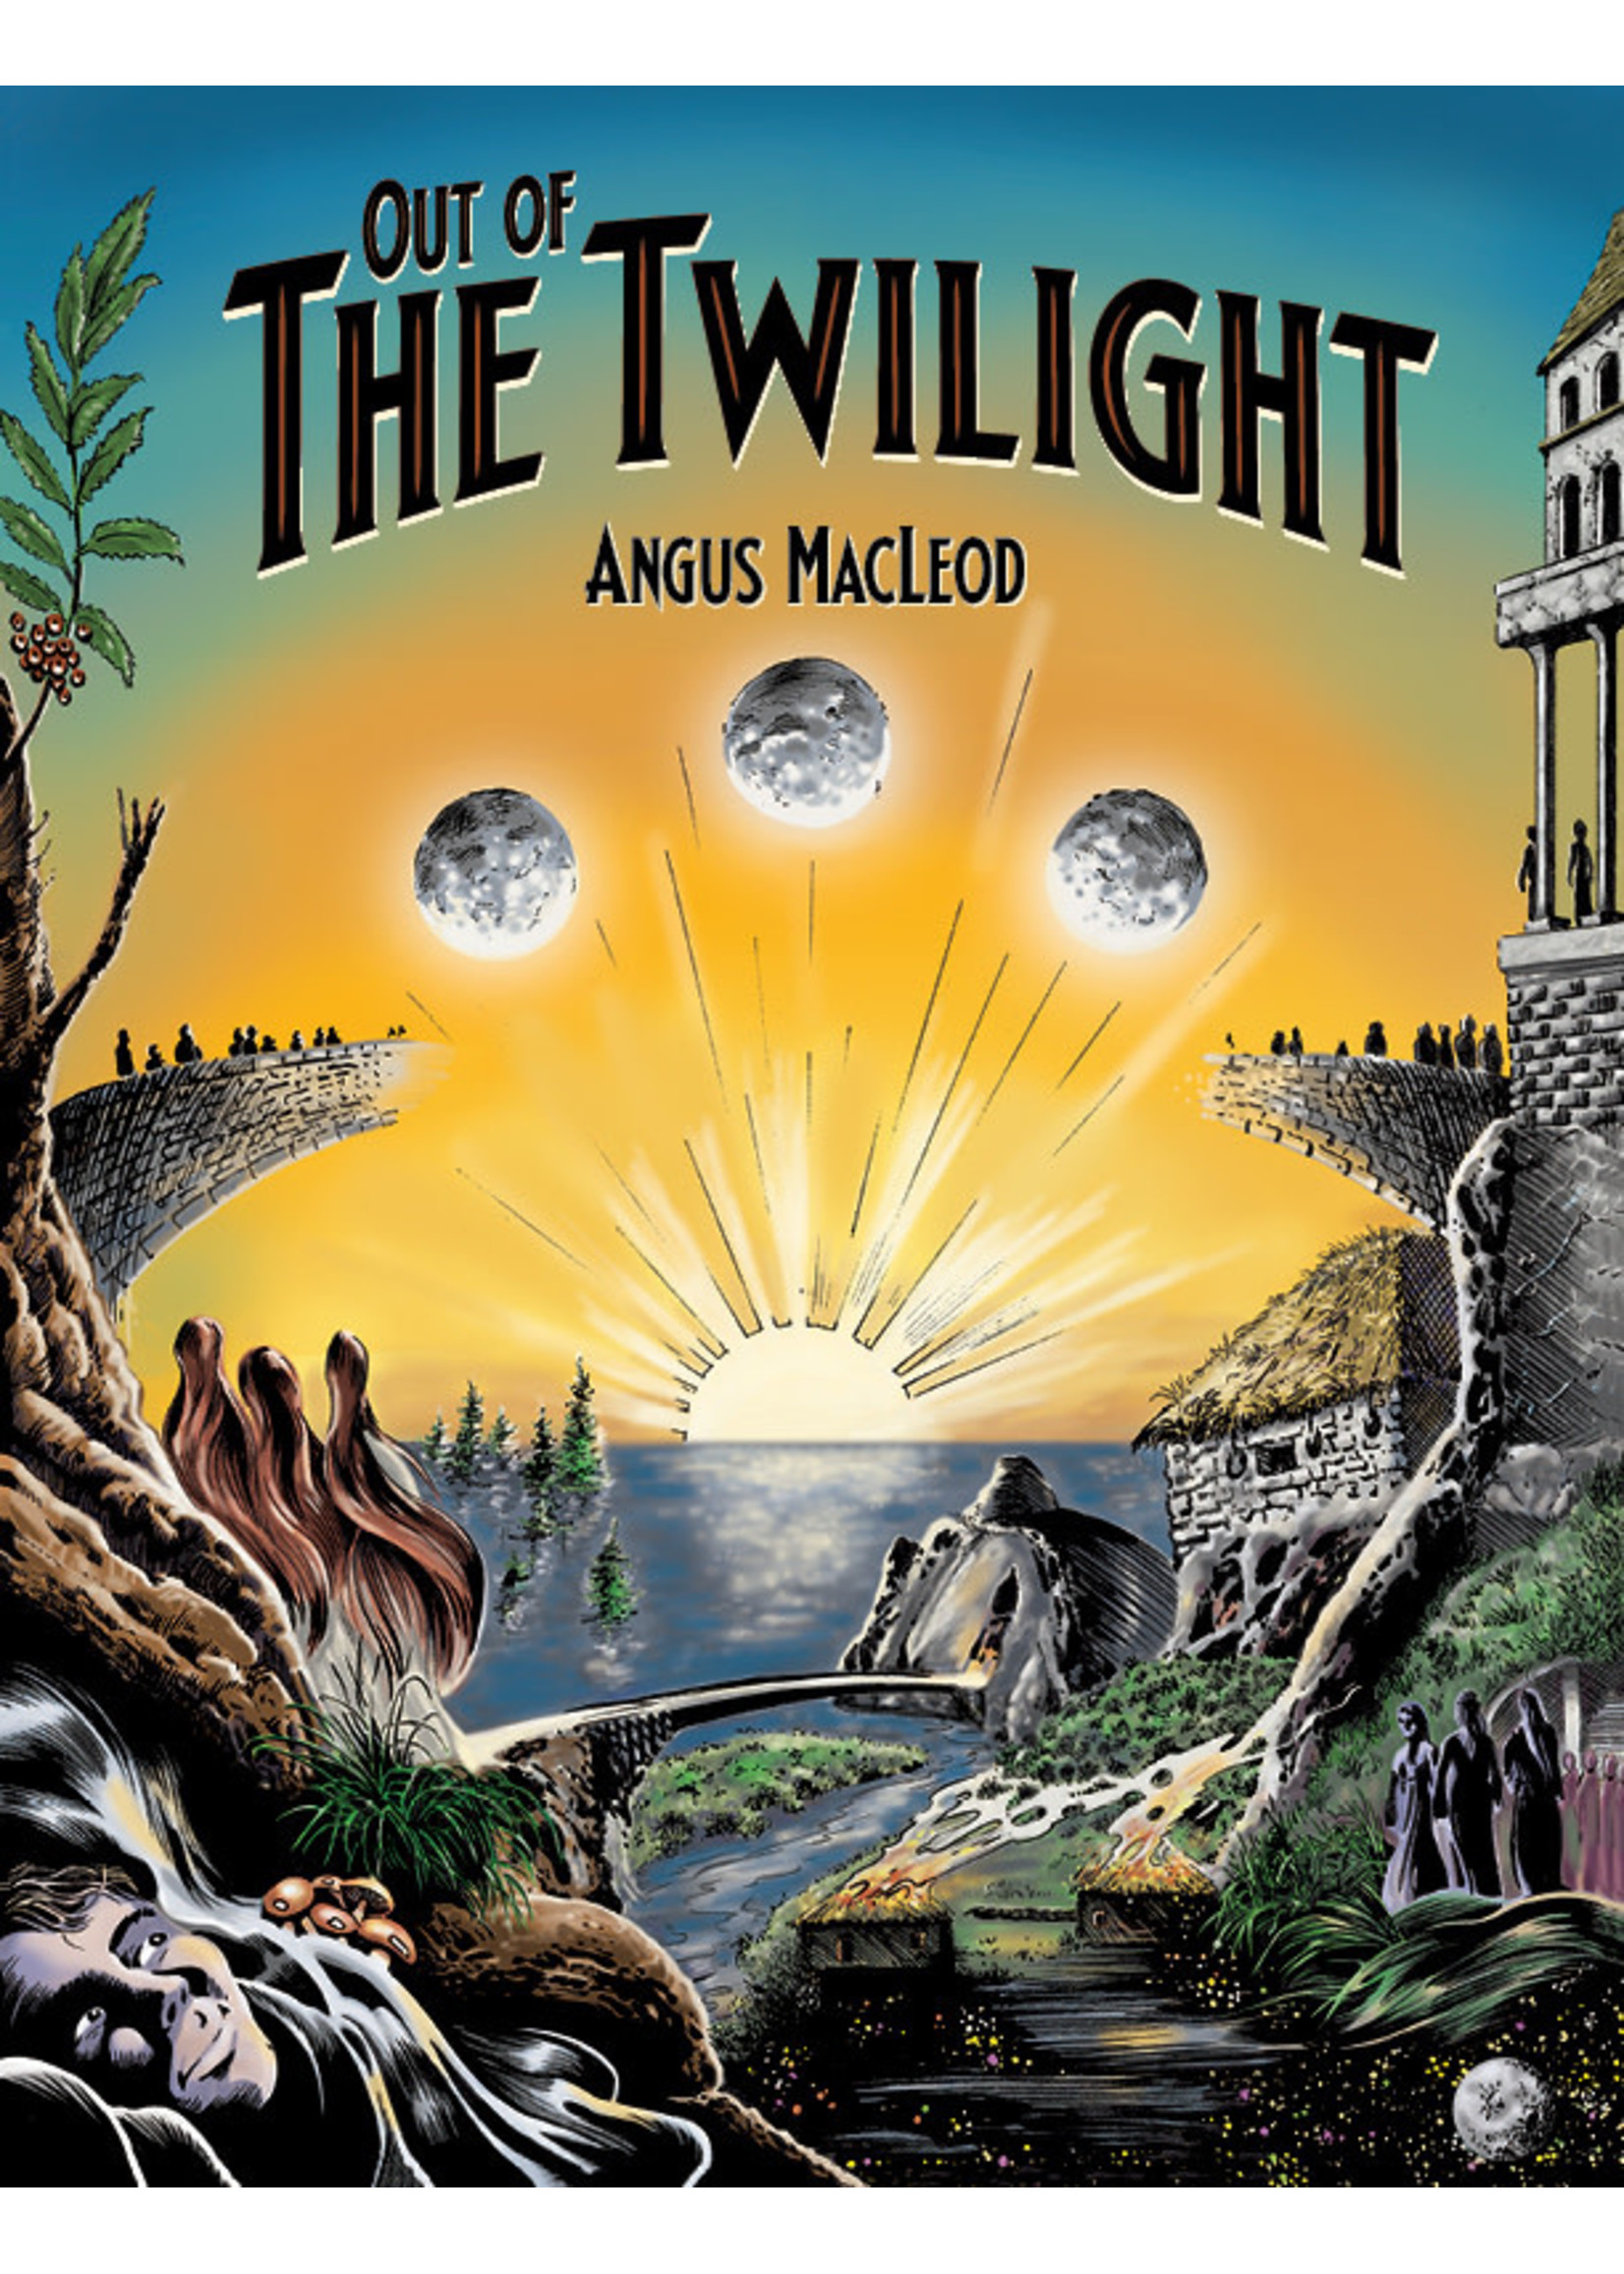 Out of the Twilight by Angus MacLeod